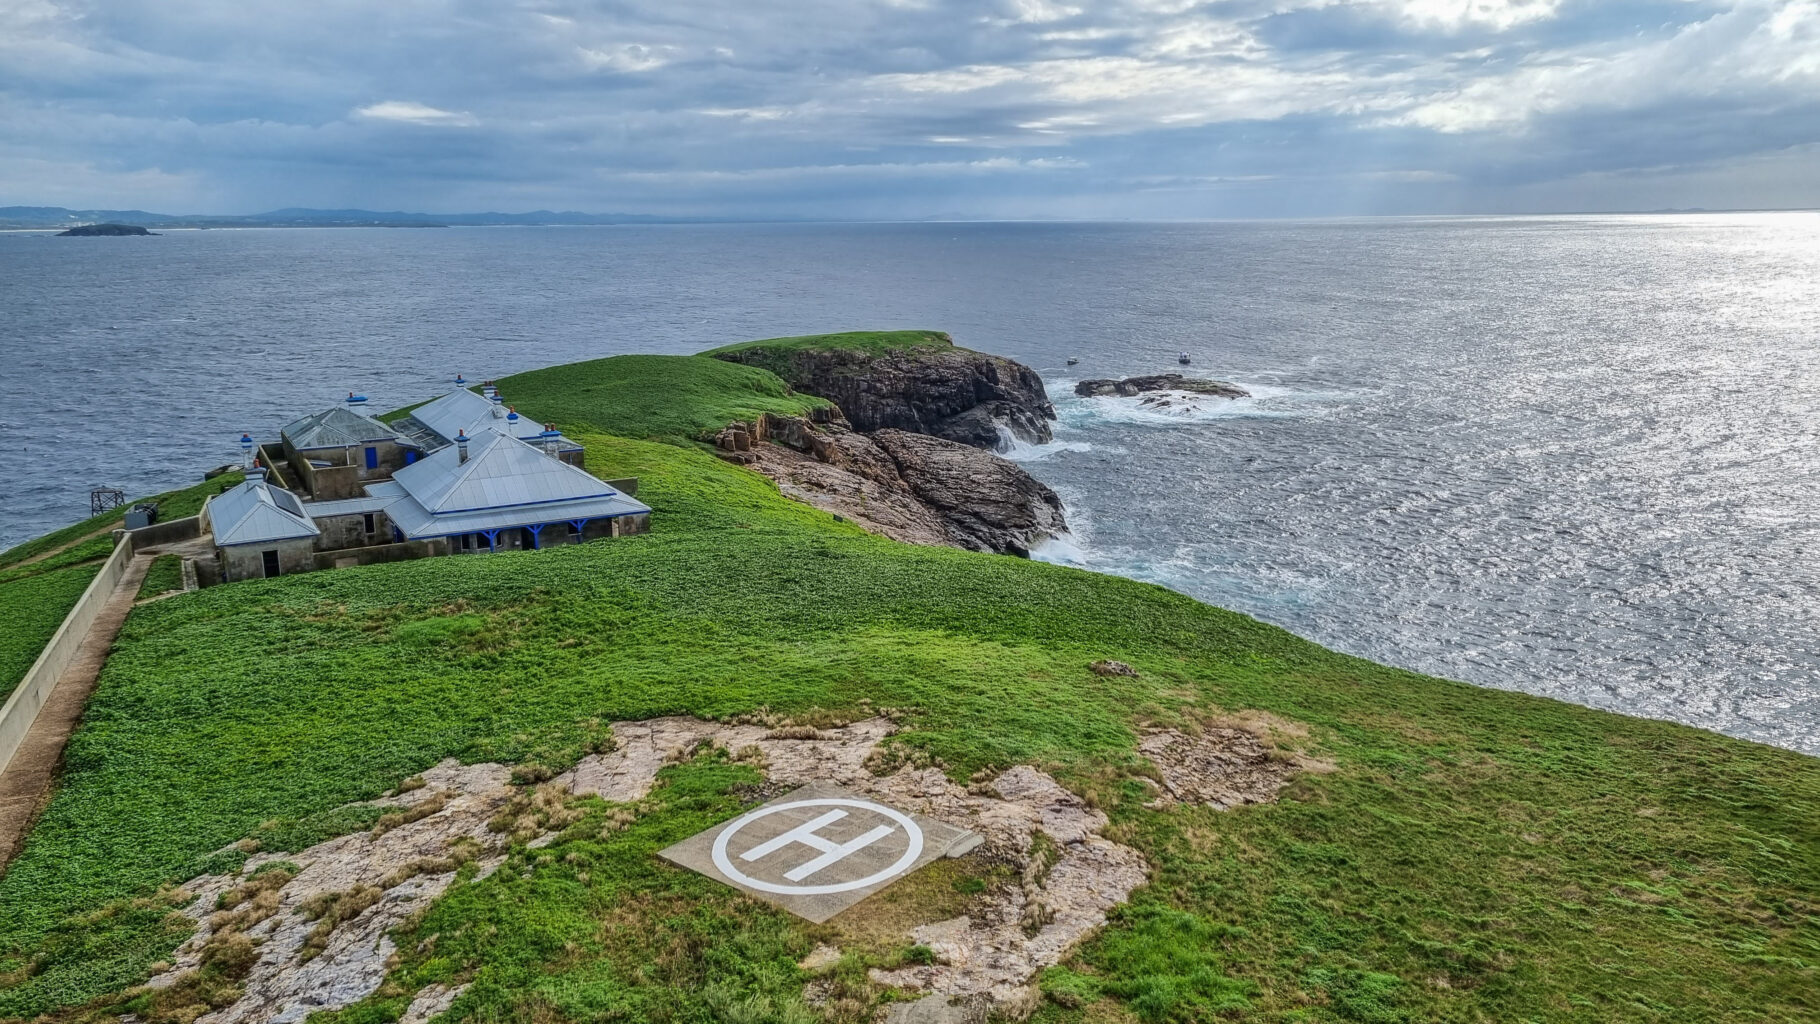 Exclusive Tour On South Solitary Island